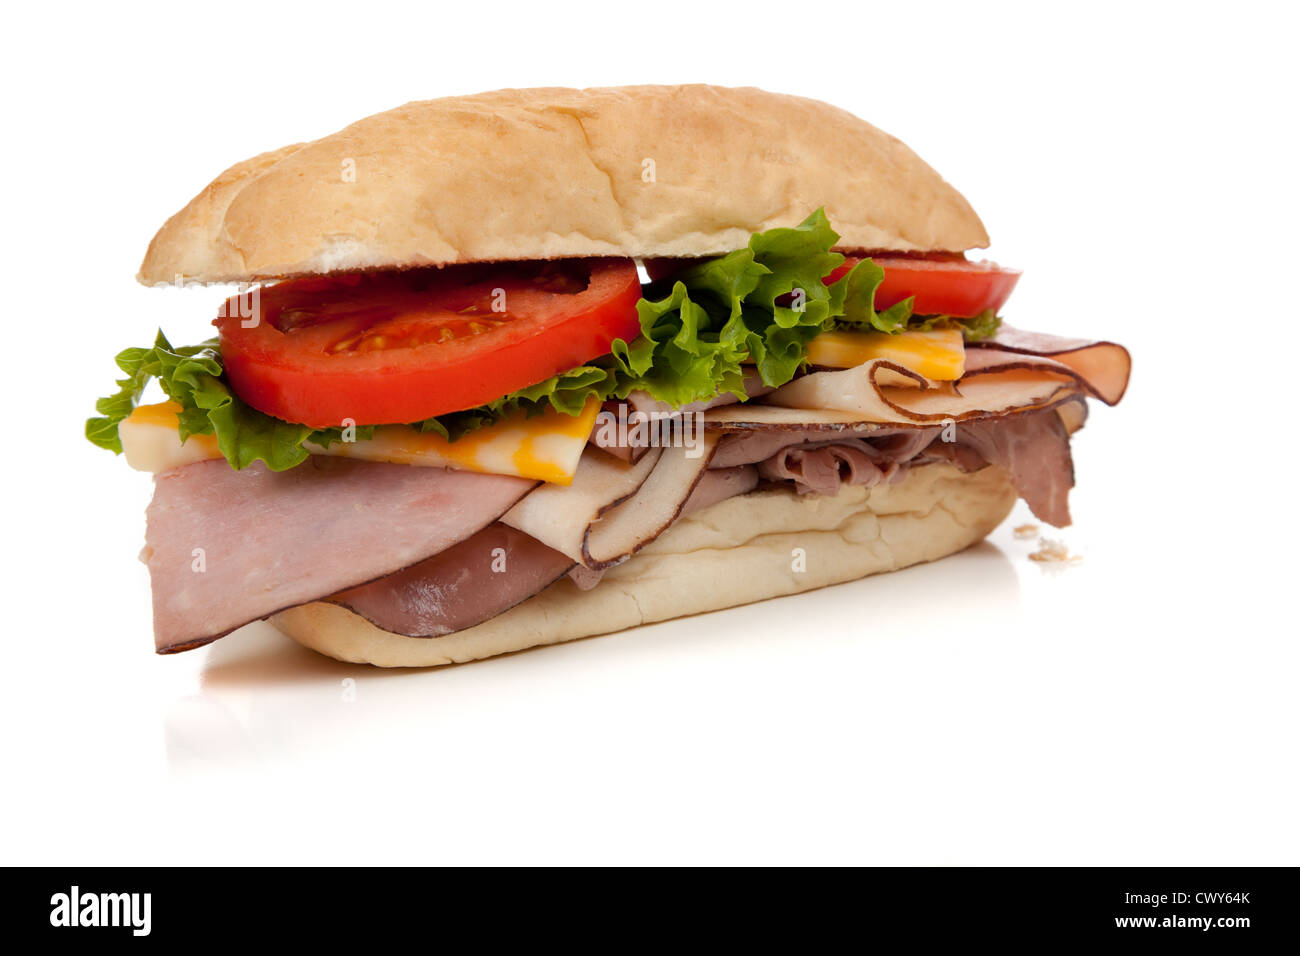 Sandwich on a white background Stock Photo